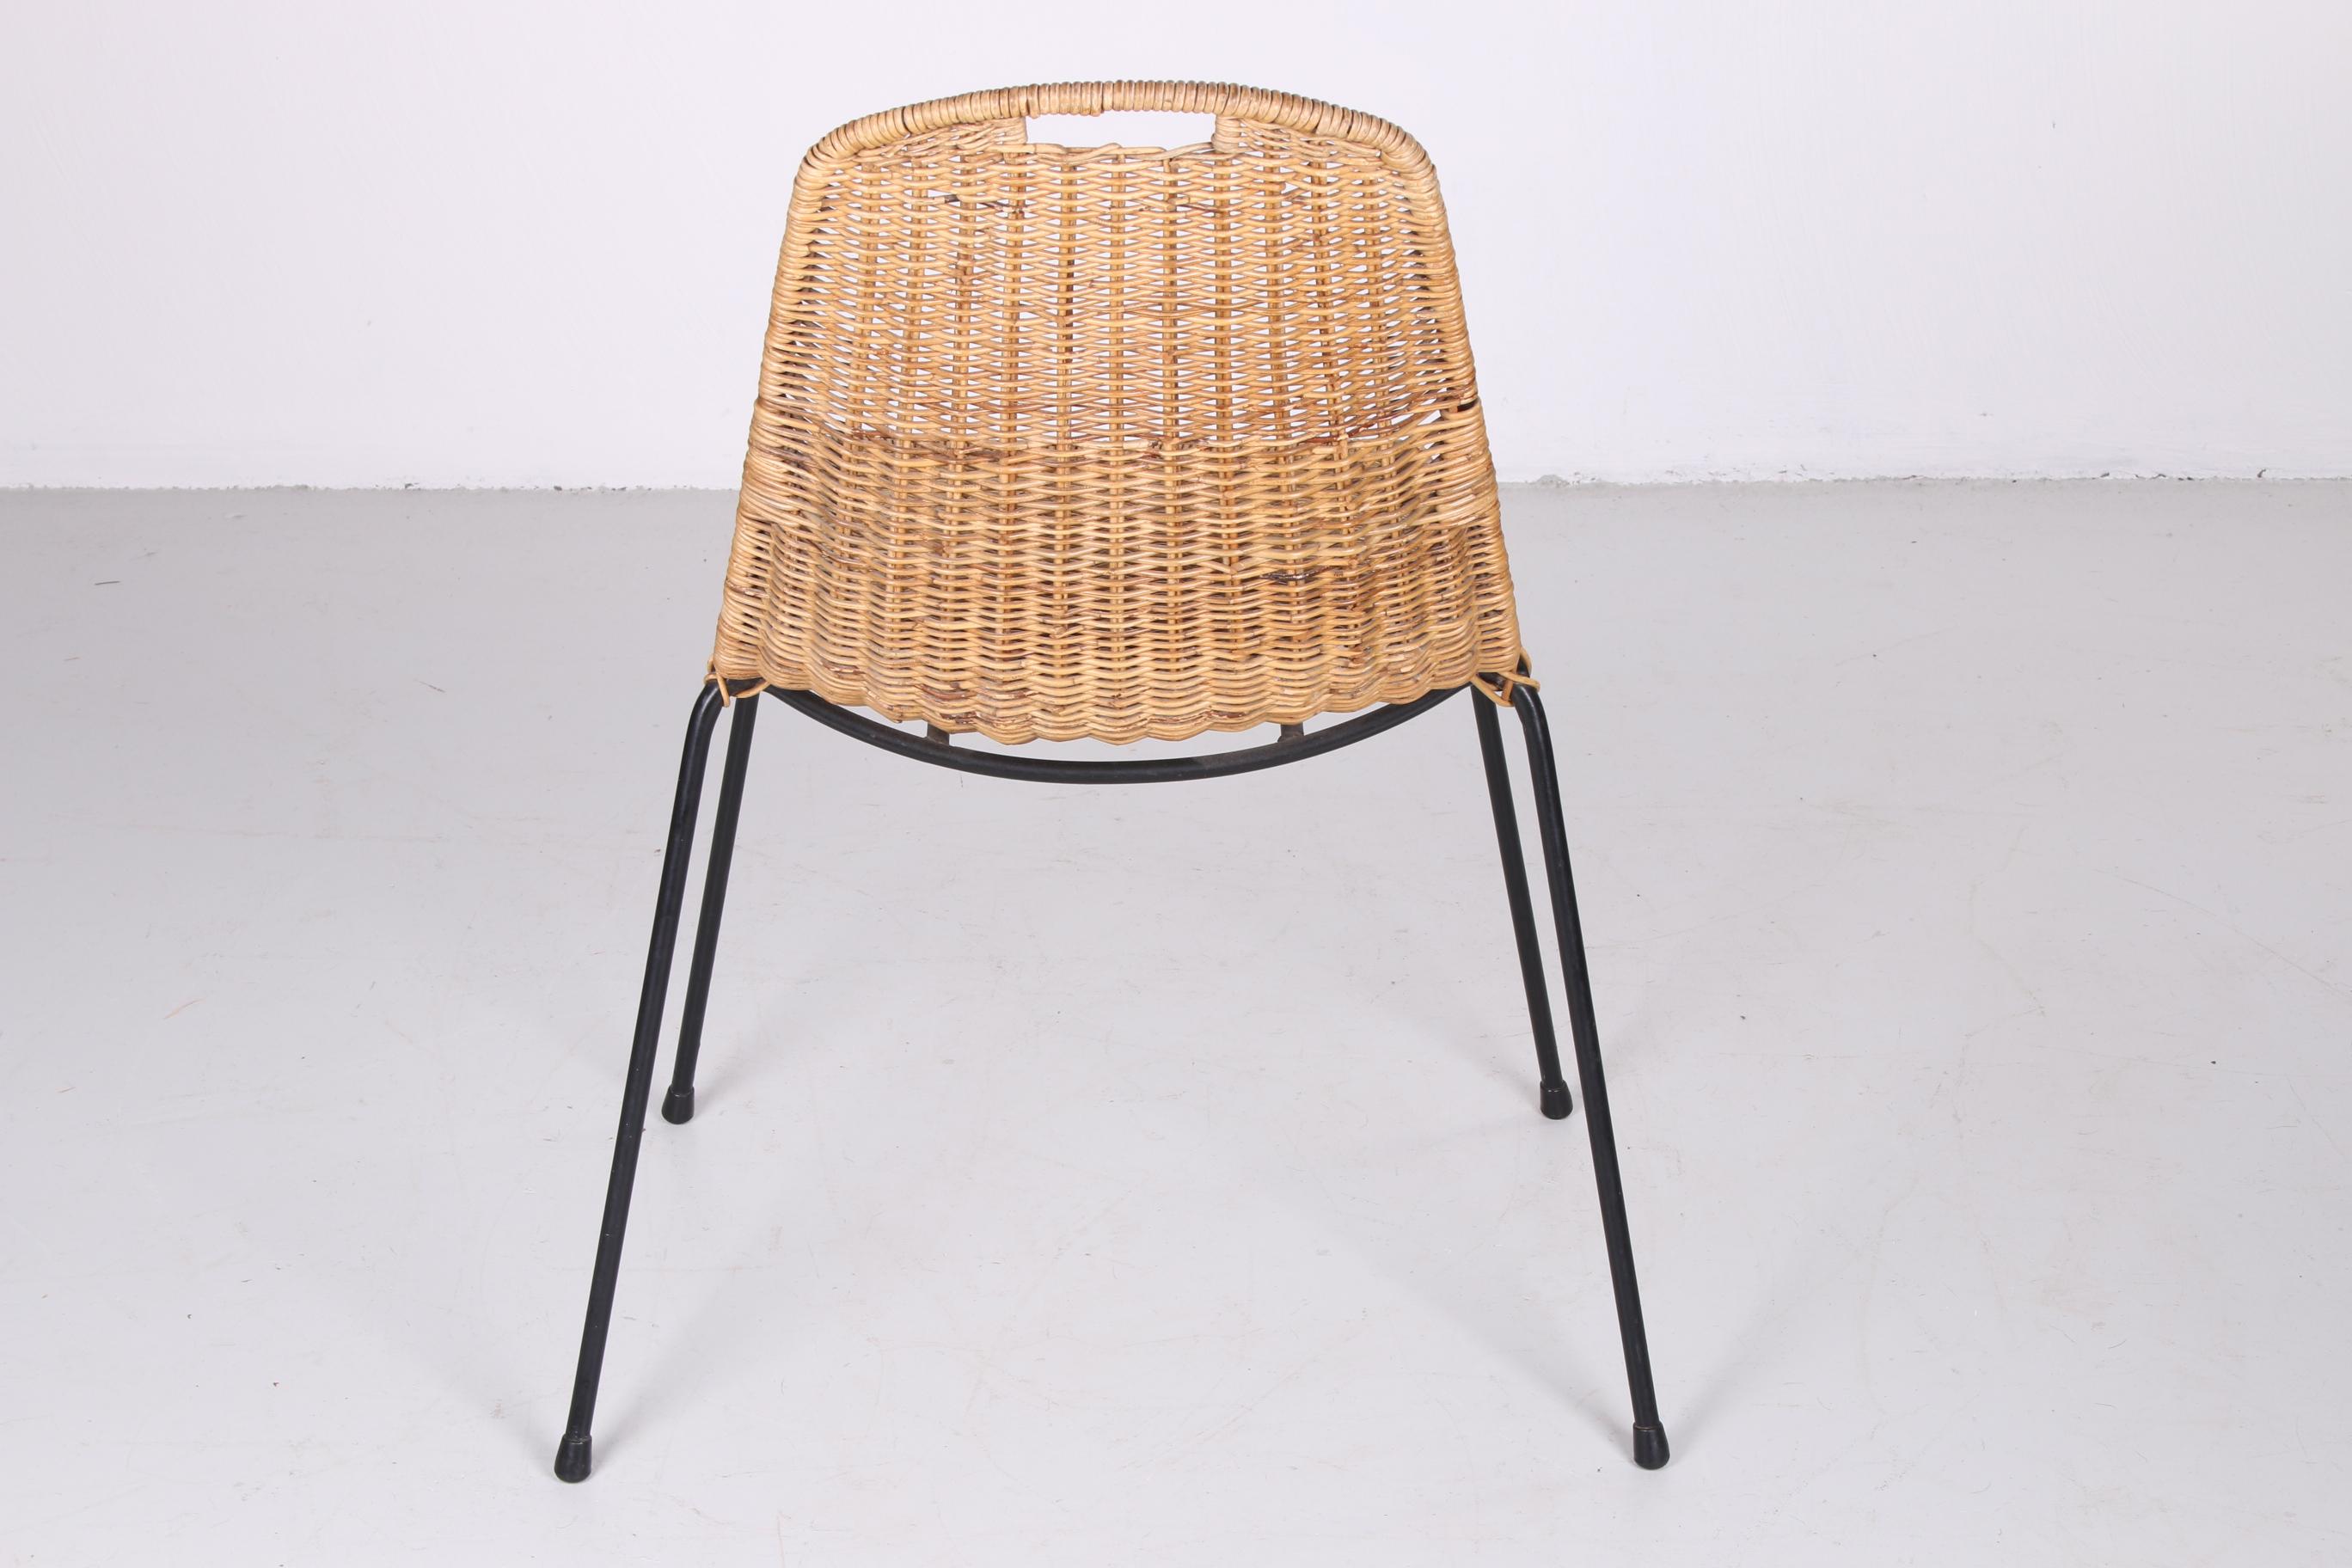 Vintage Wicker Dining Table Chair with Black Metal Legs 1